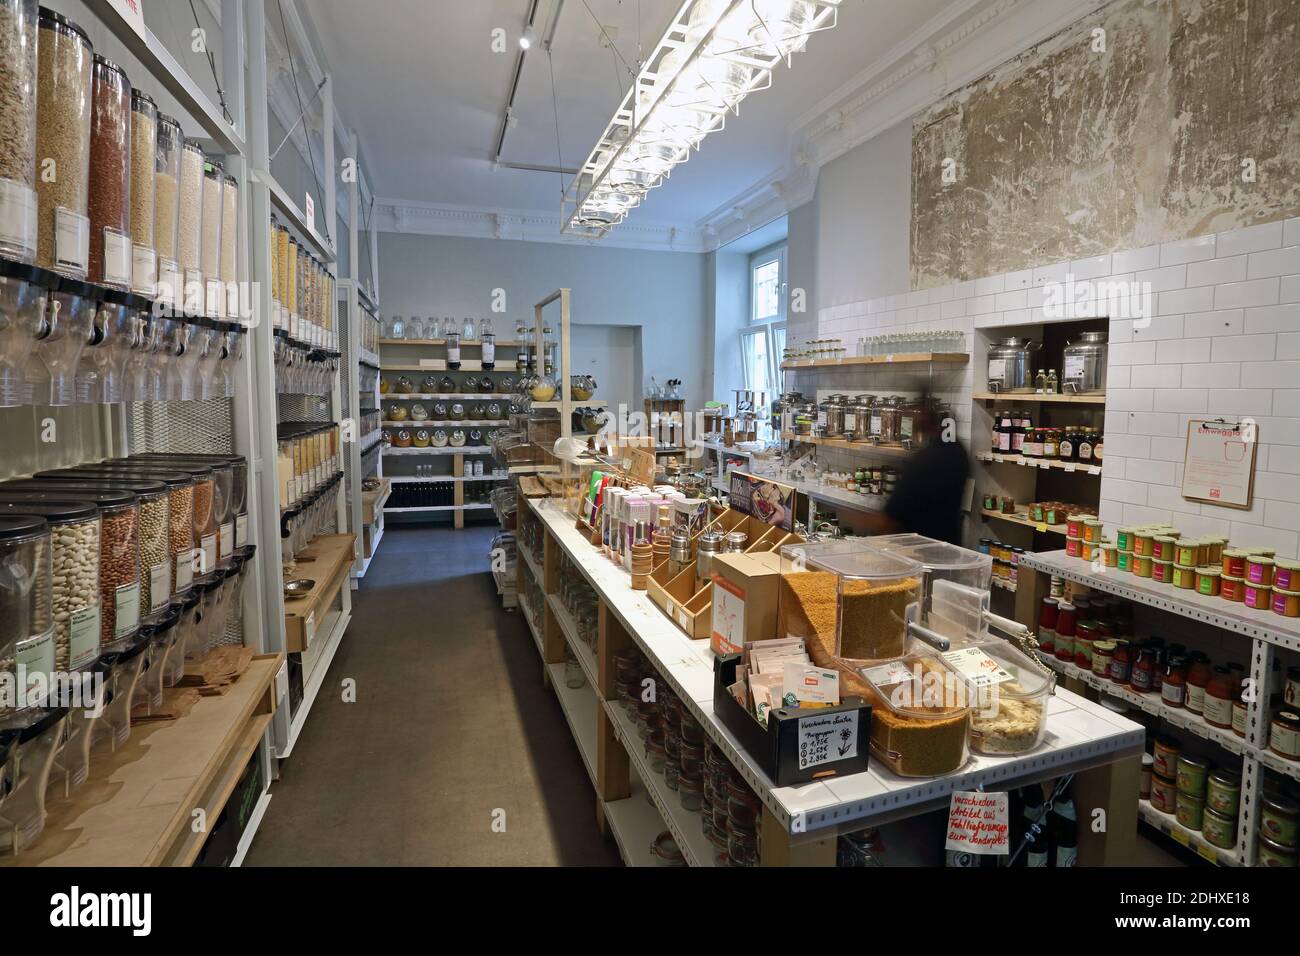 Germany / Berlin /Original Unverpackt, a German concept store selling groceries without the packaging. Stock Photo